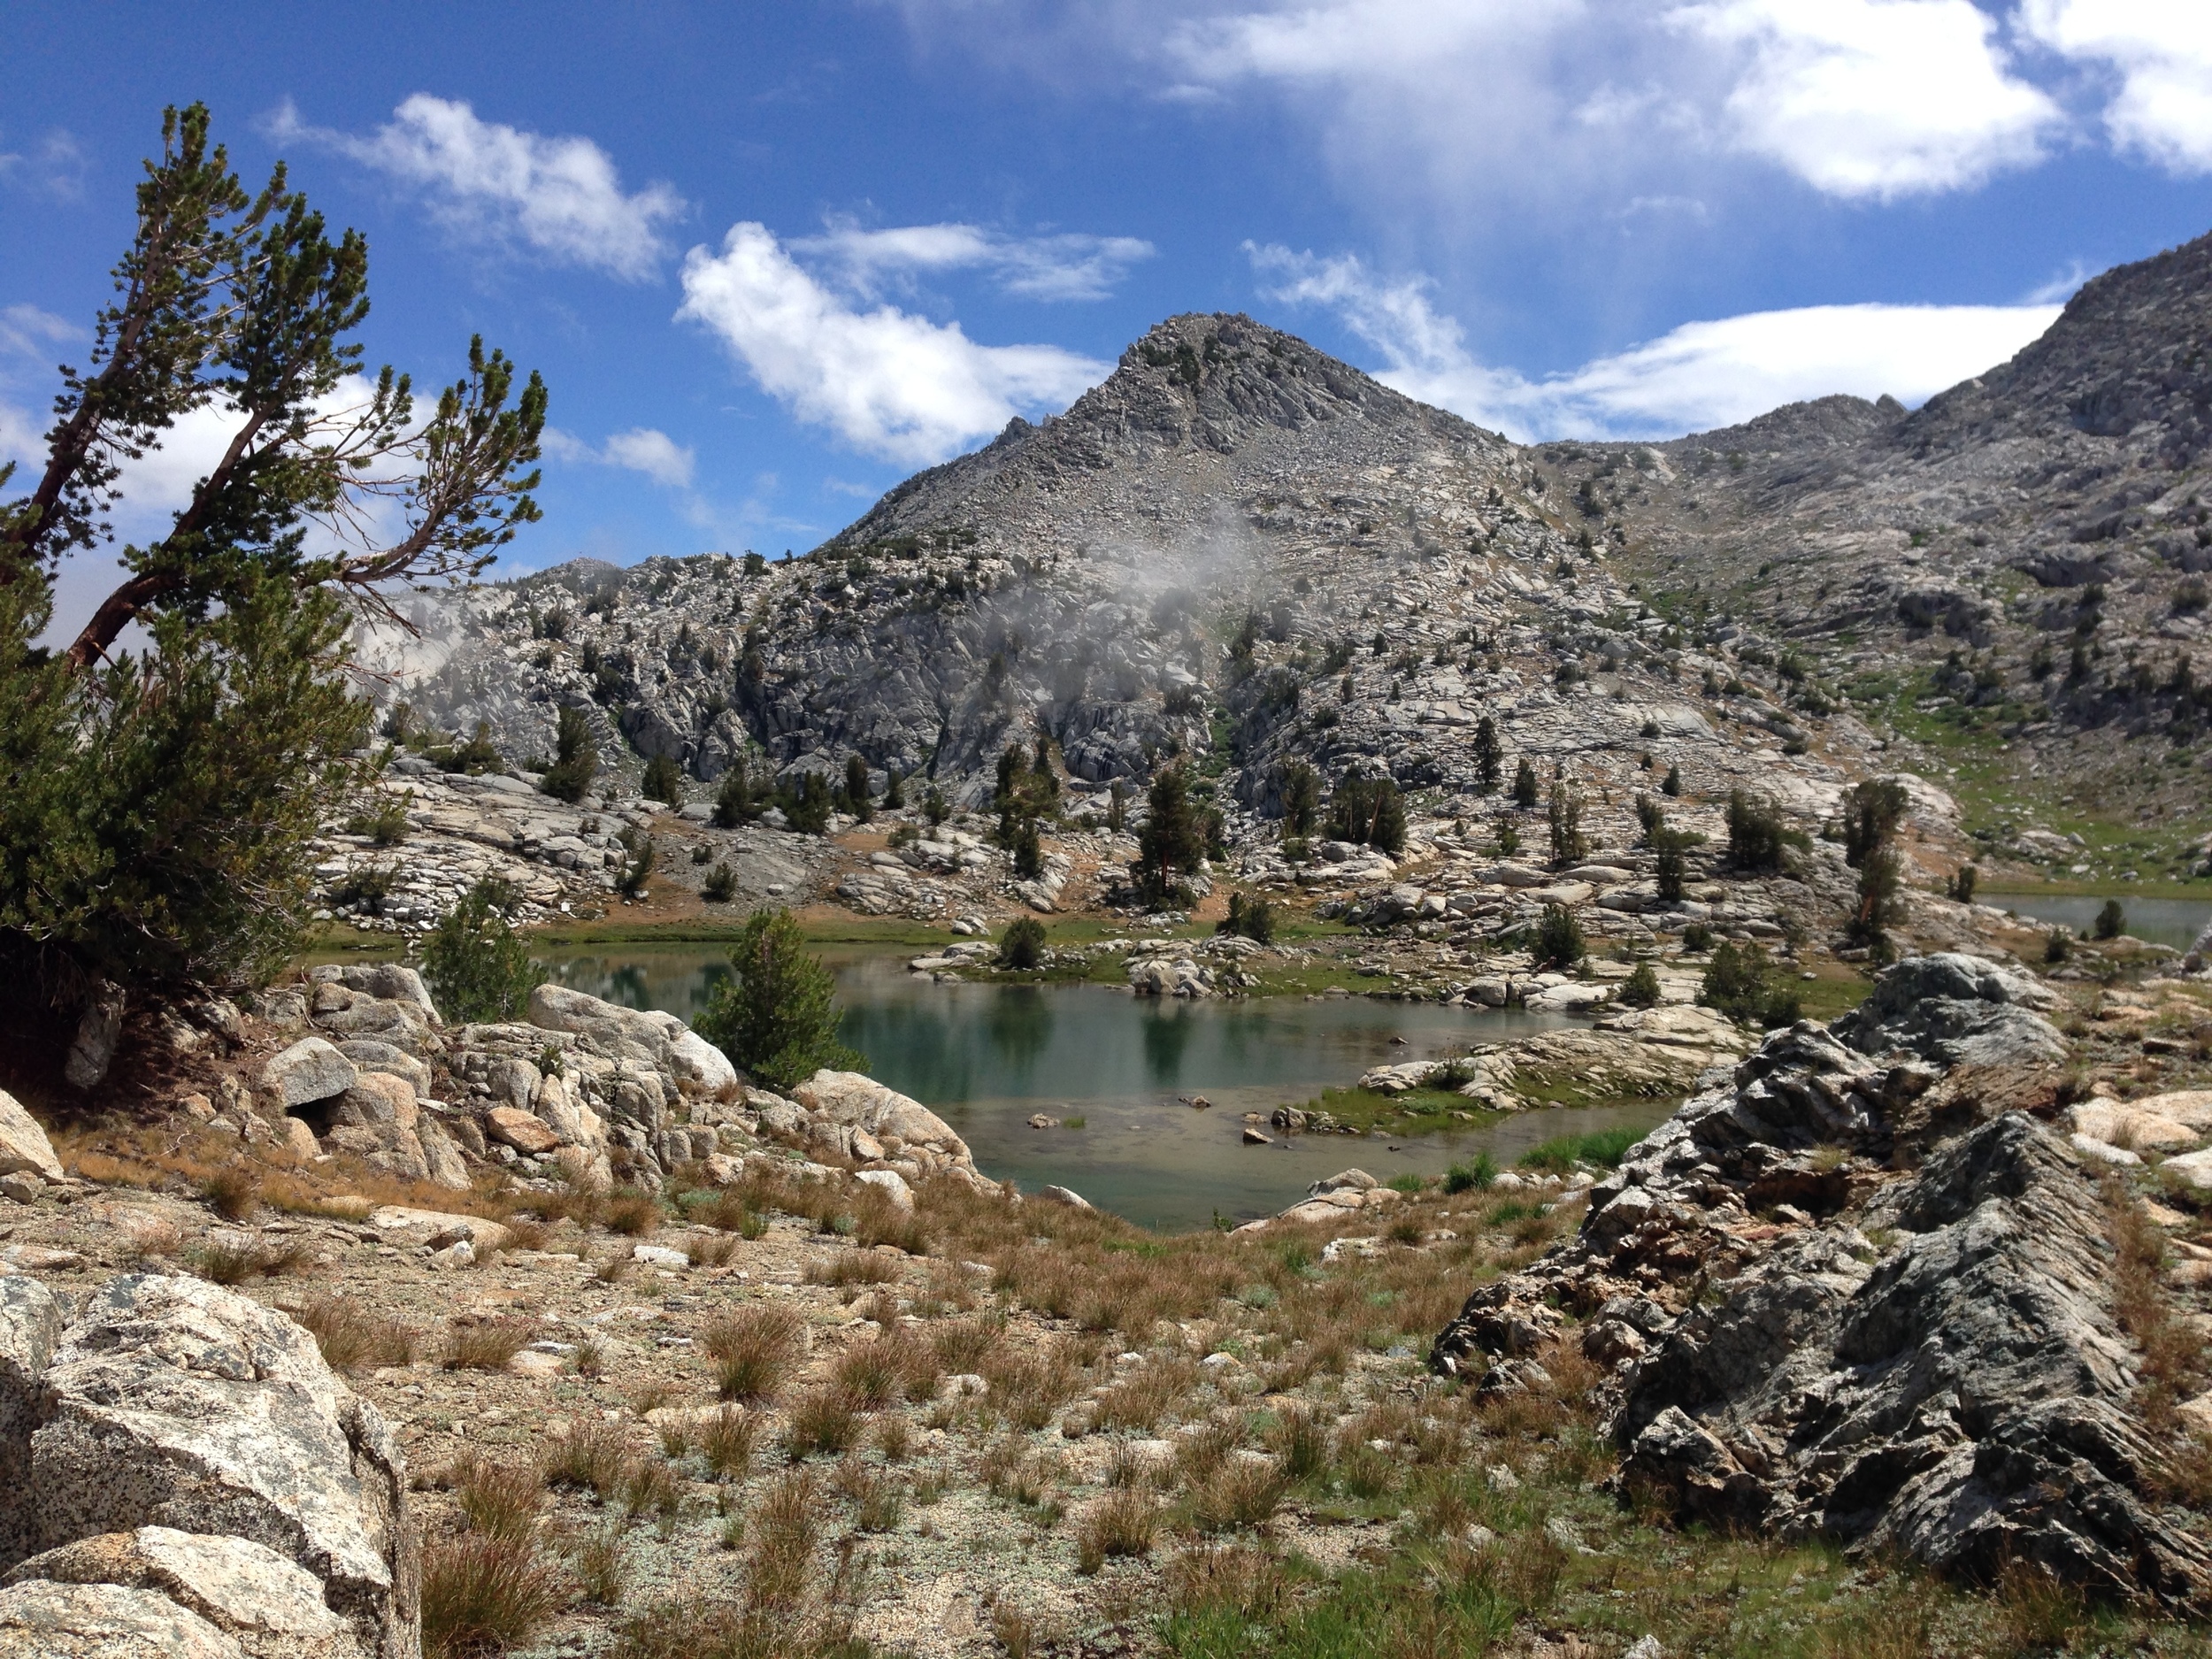  Saddle between Volcanic Lakes Basin and the Granite Pass trail, Kings Canyon National Park 